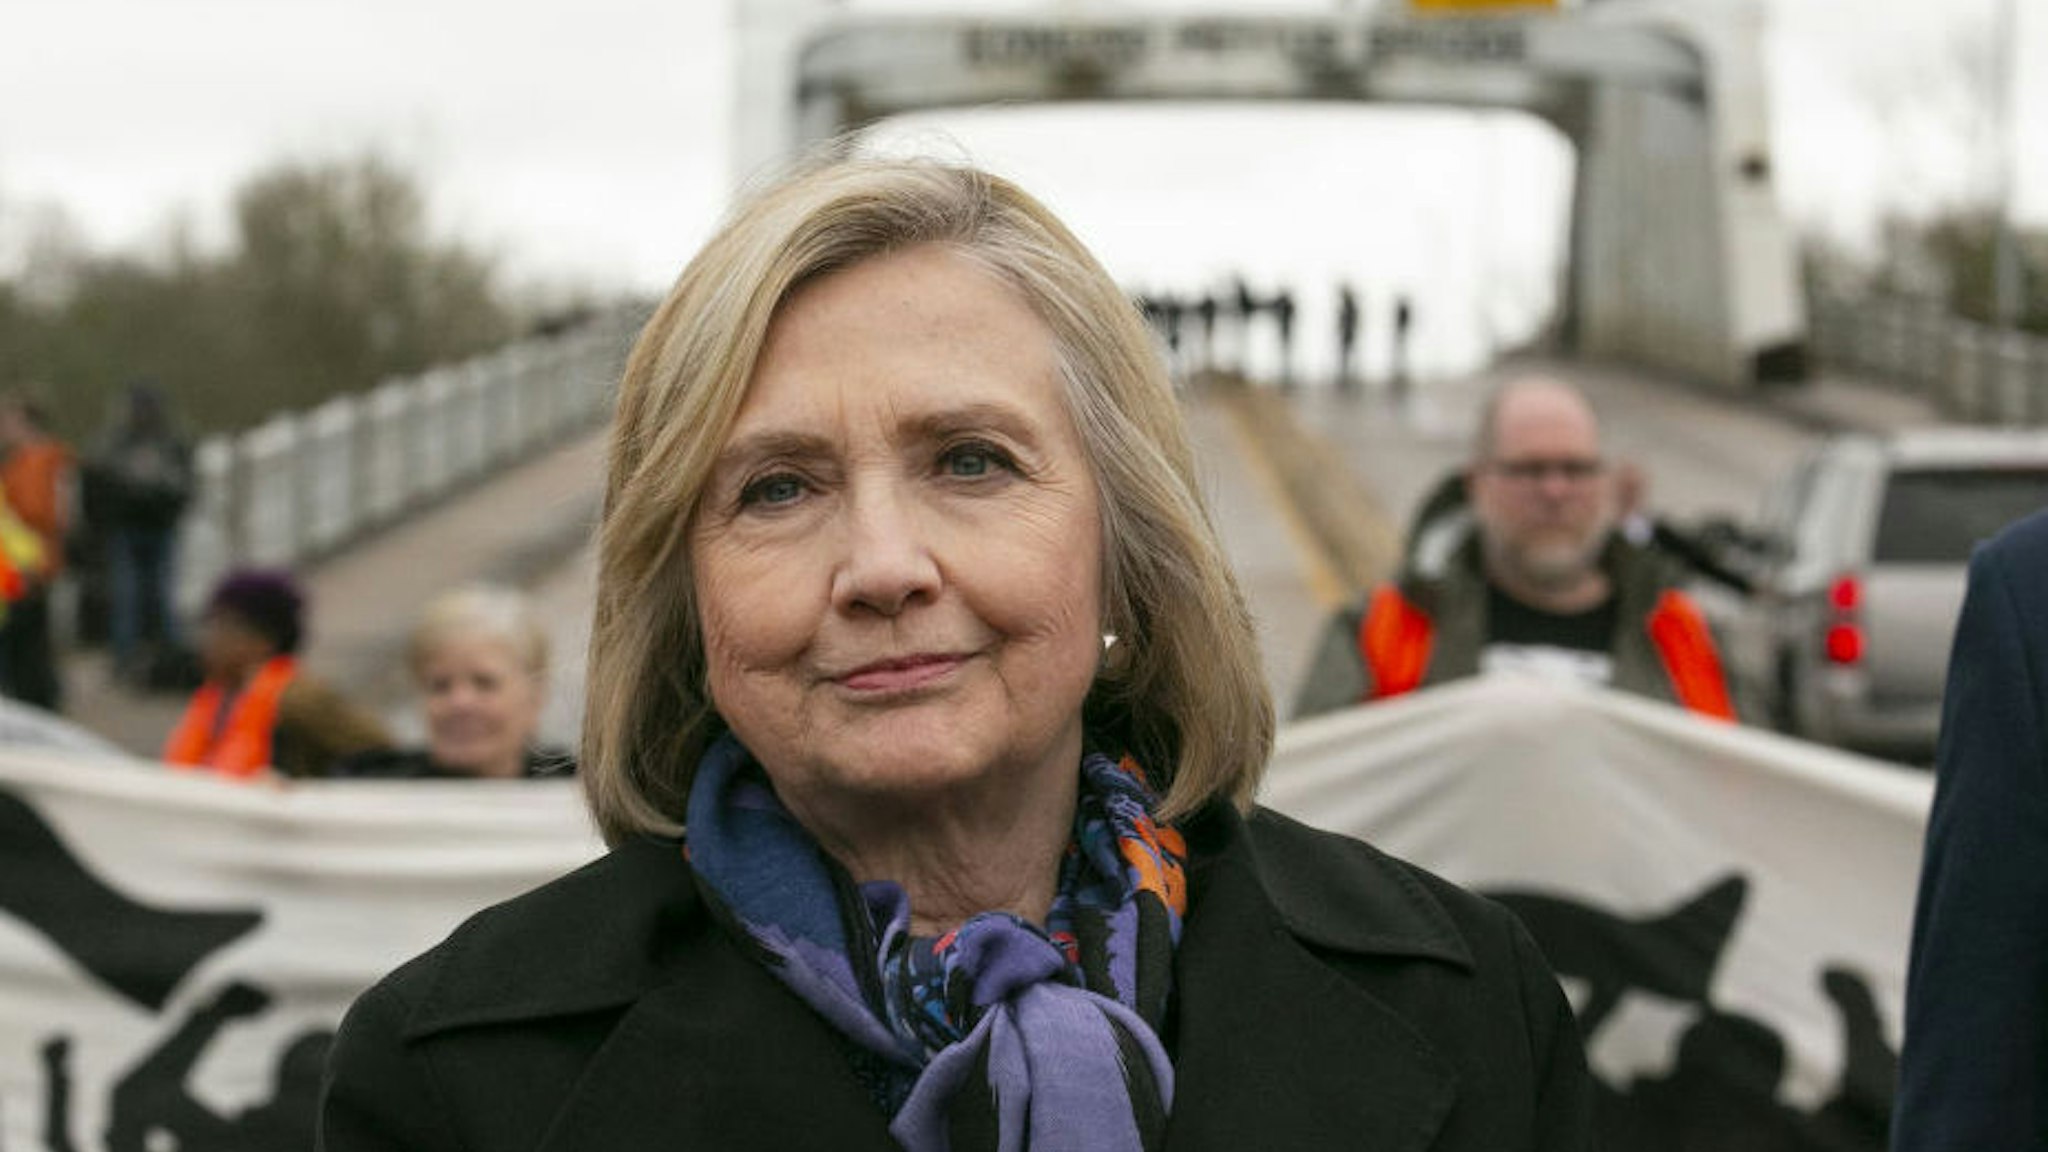 Hillary Clinton, former U.S. secretary of state, attends the Selma Bridge Crossing Jubilee at the Edmund Pettus Bridge in Selma, Alabama, U.S., on Sunday, March 3, 2019. This event celebrates the cultural and spiritual diversity of the Voting Rights Movement and calls for people of all faiths to work together.